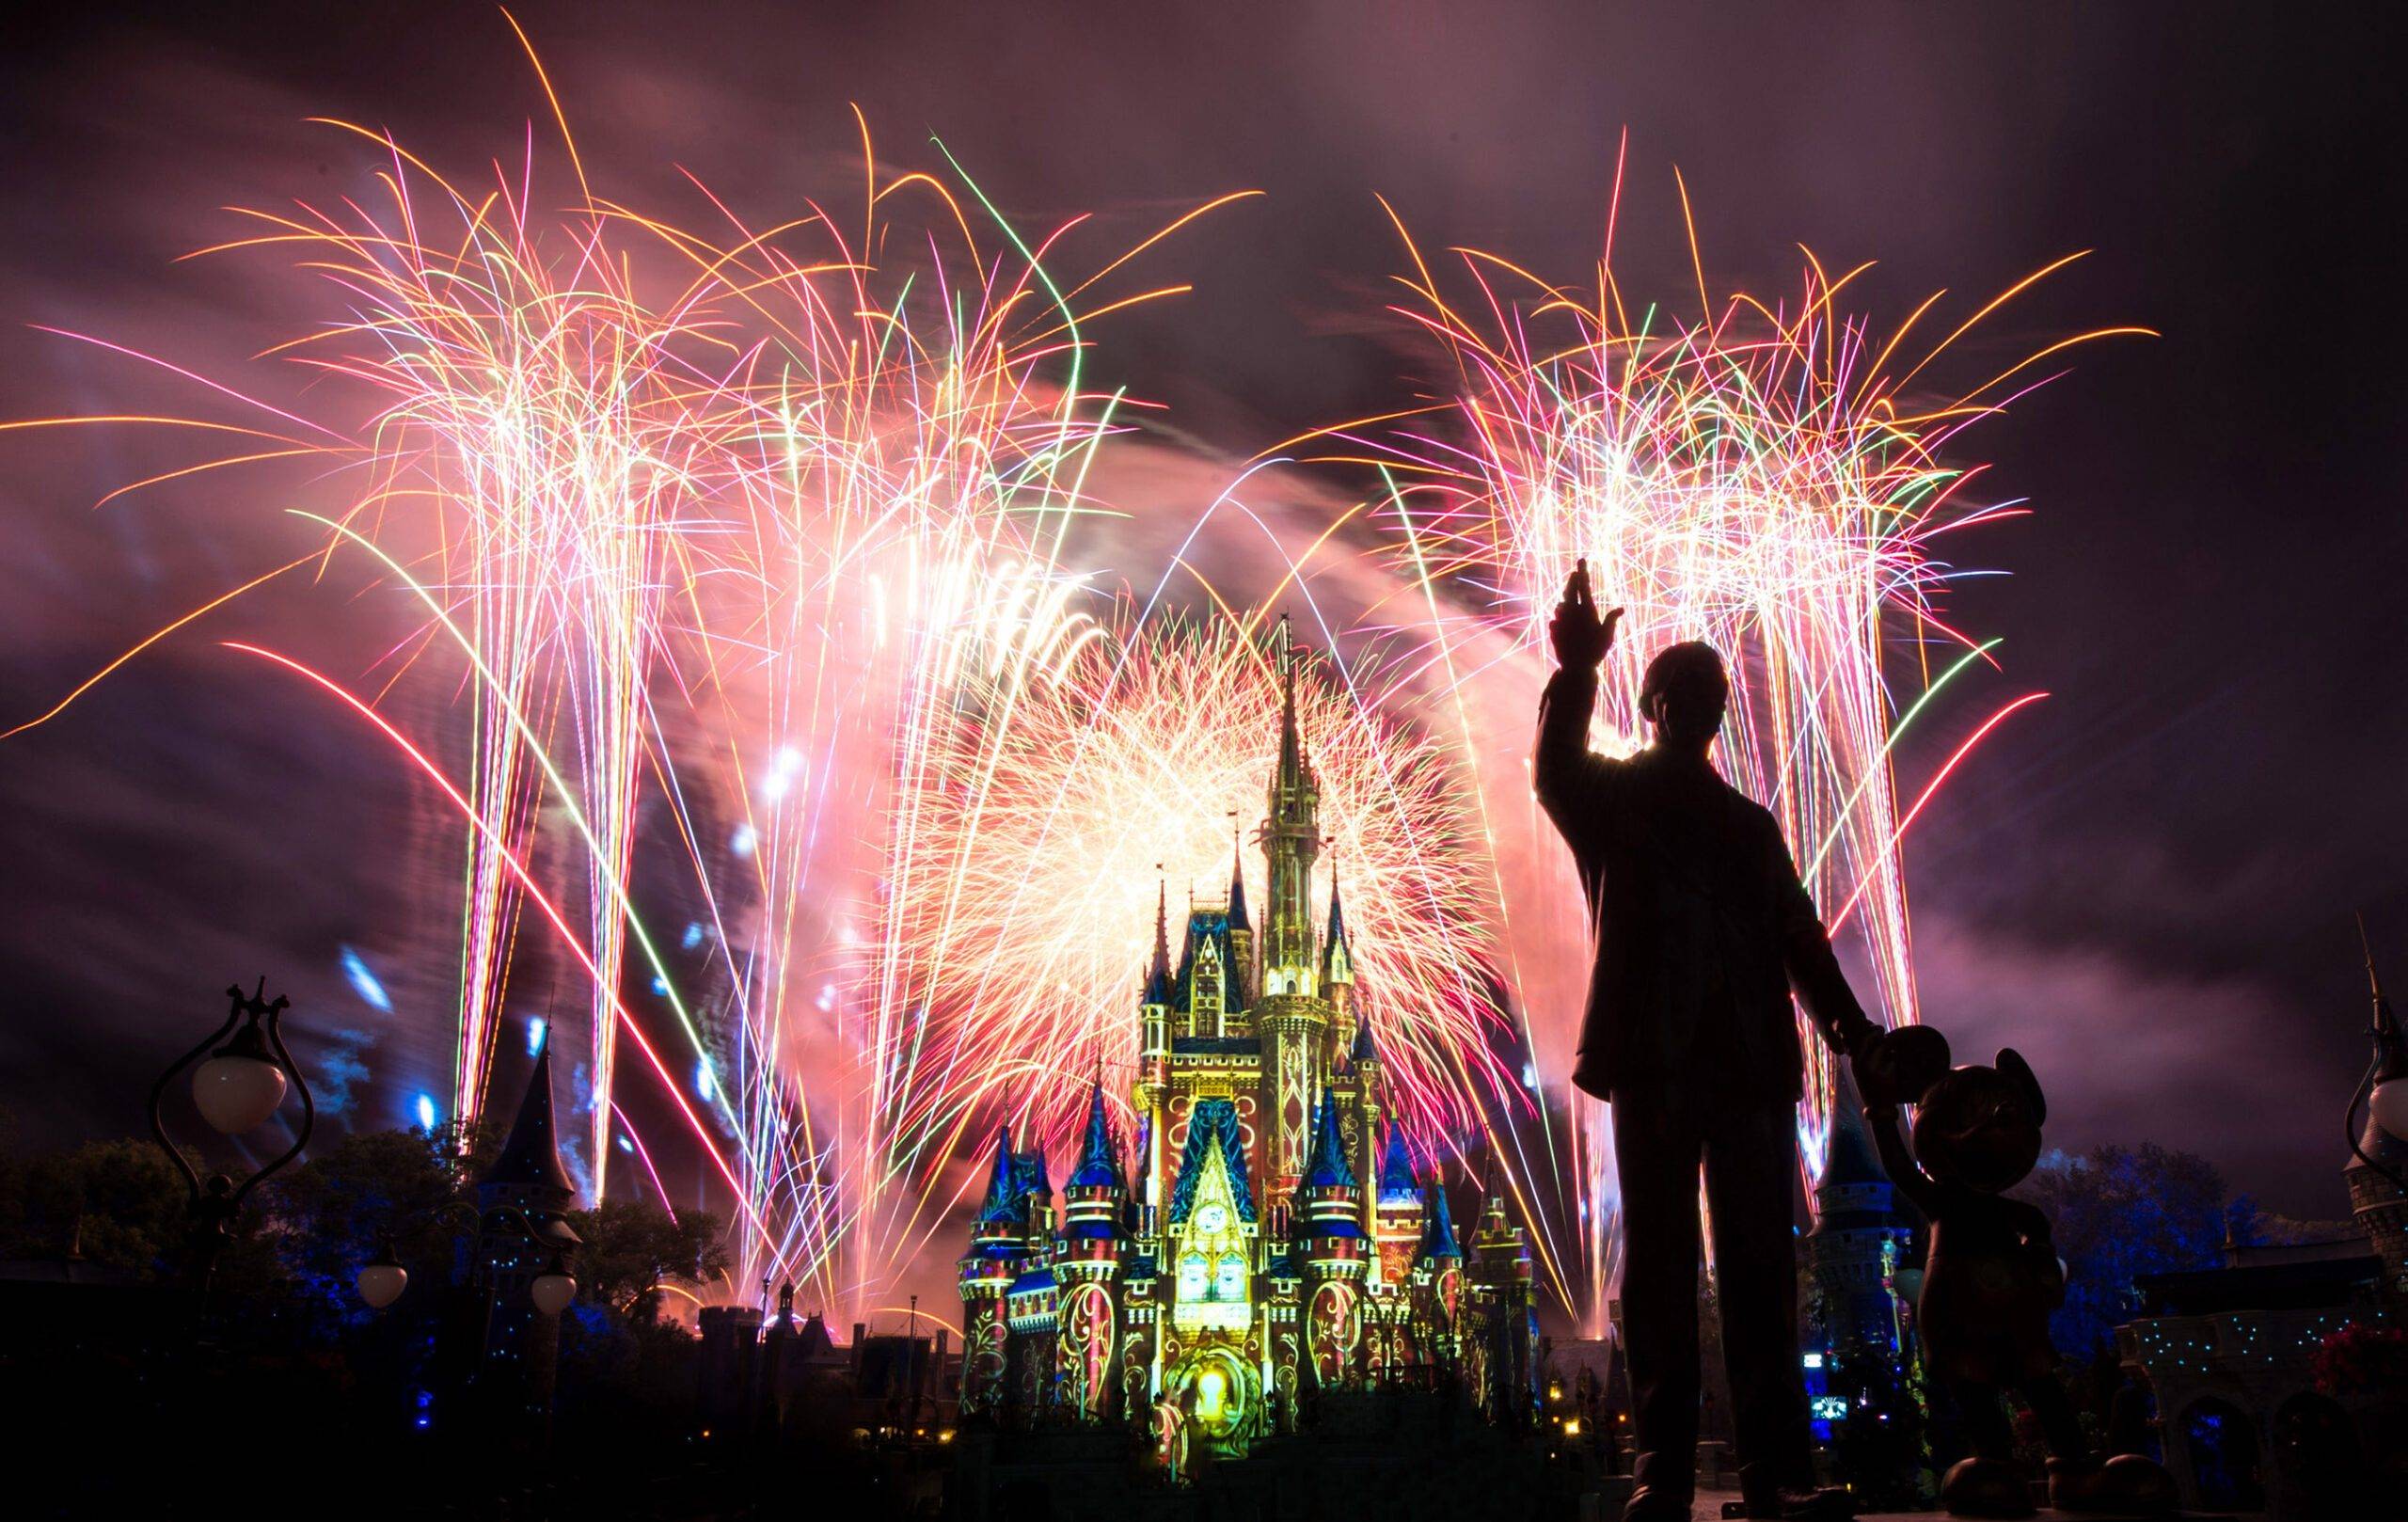 Review of Happily Ever After